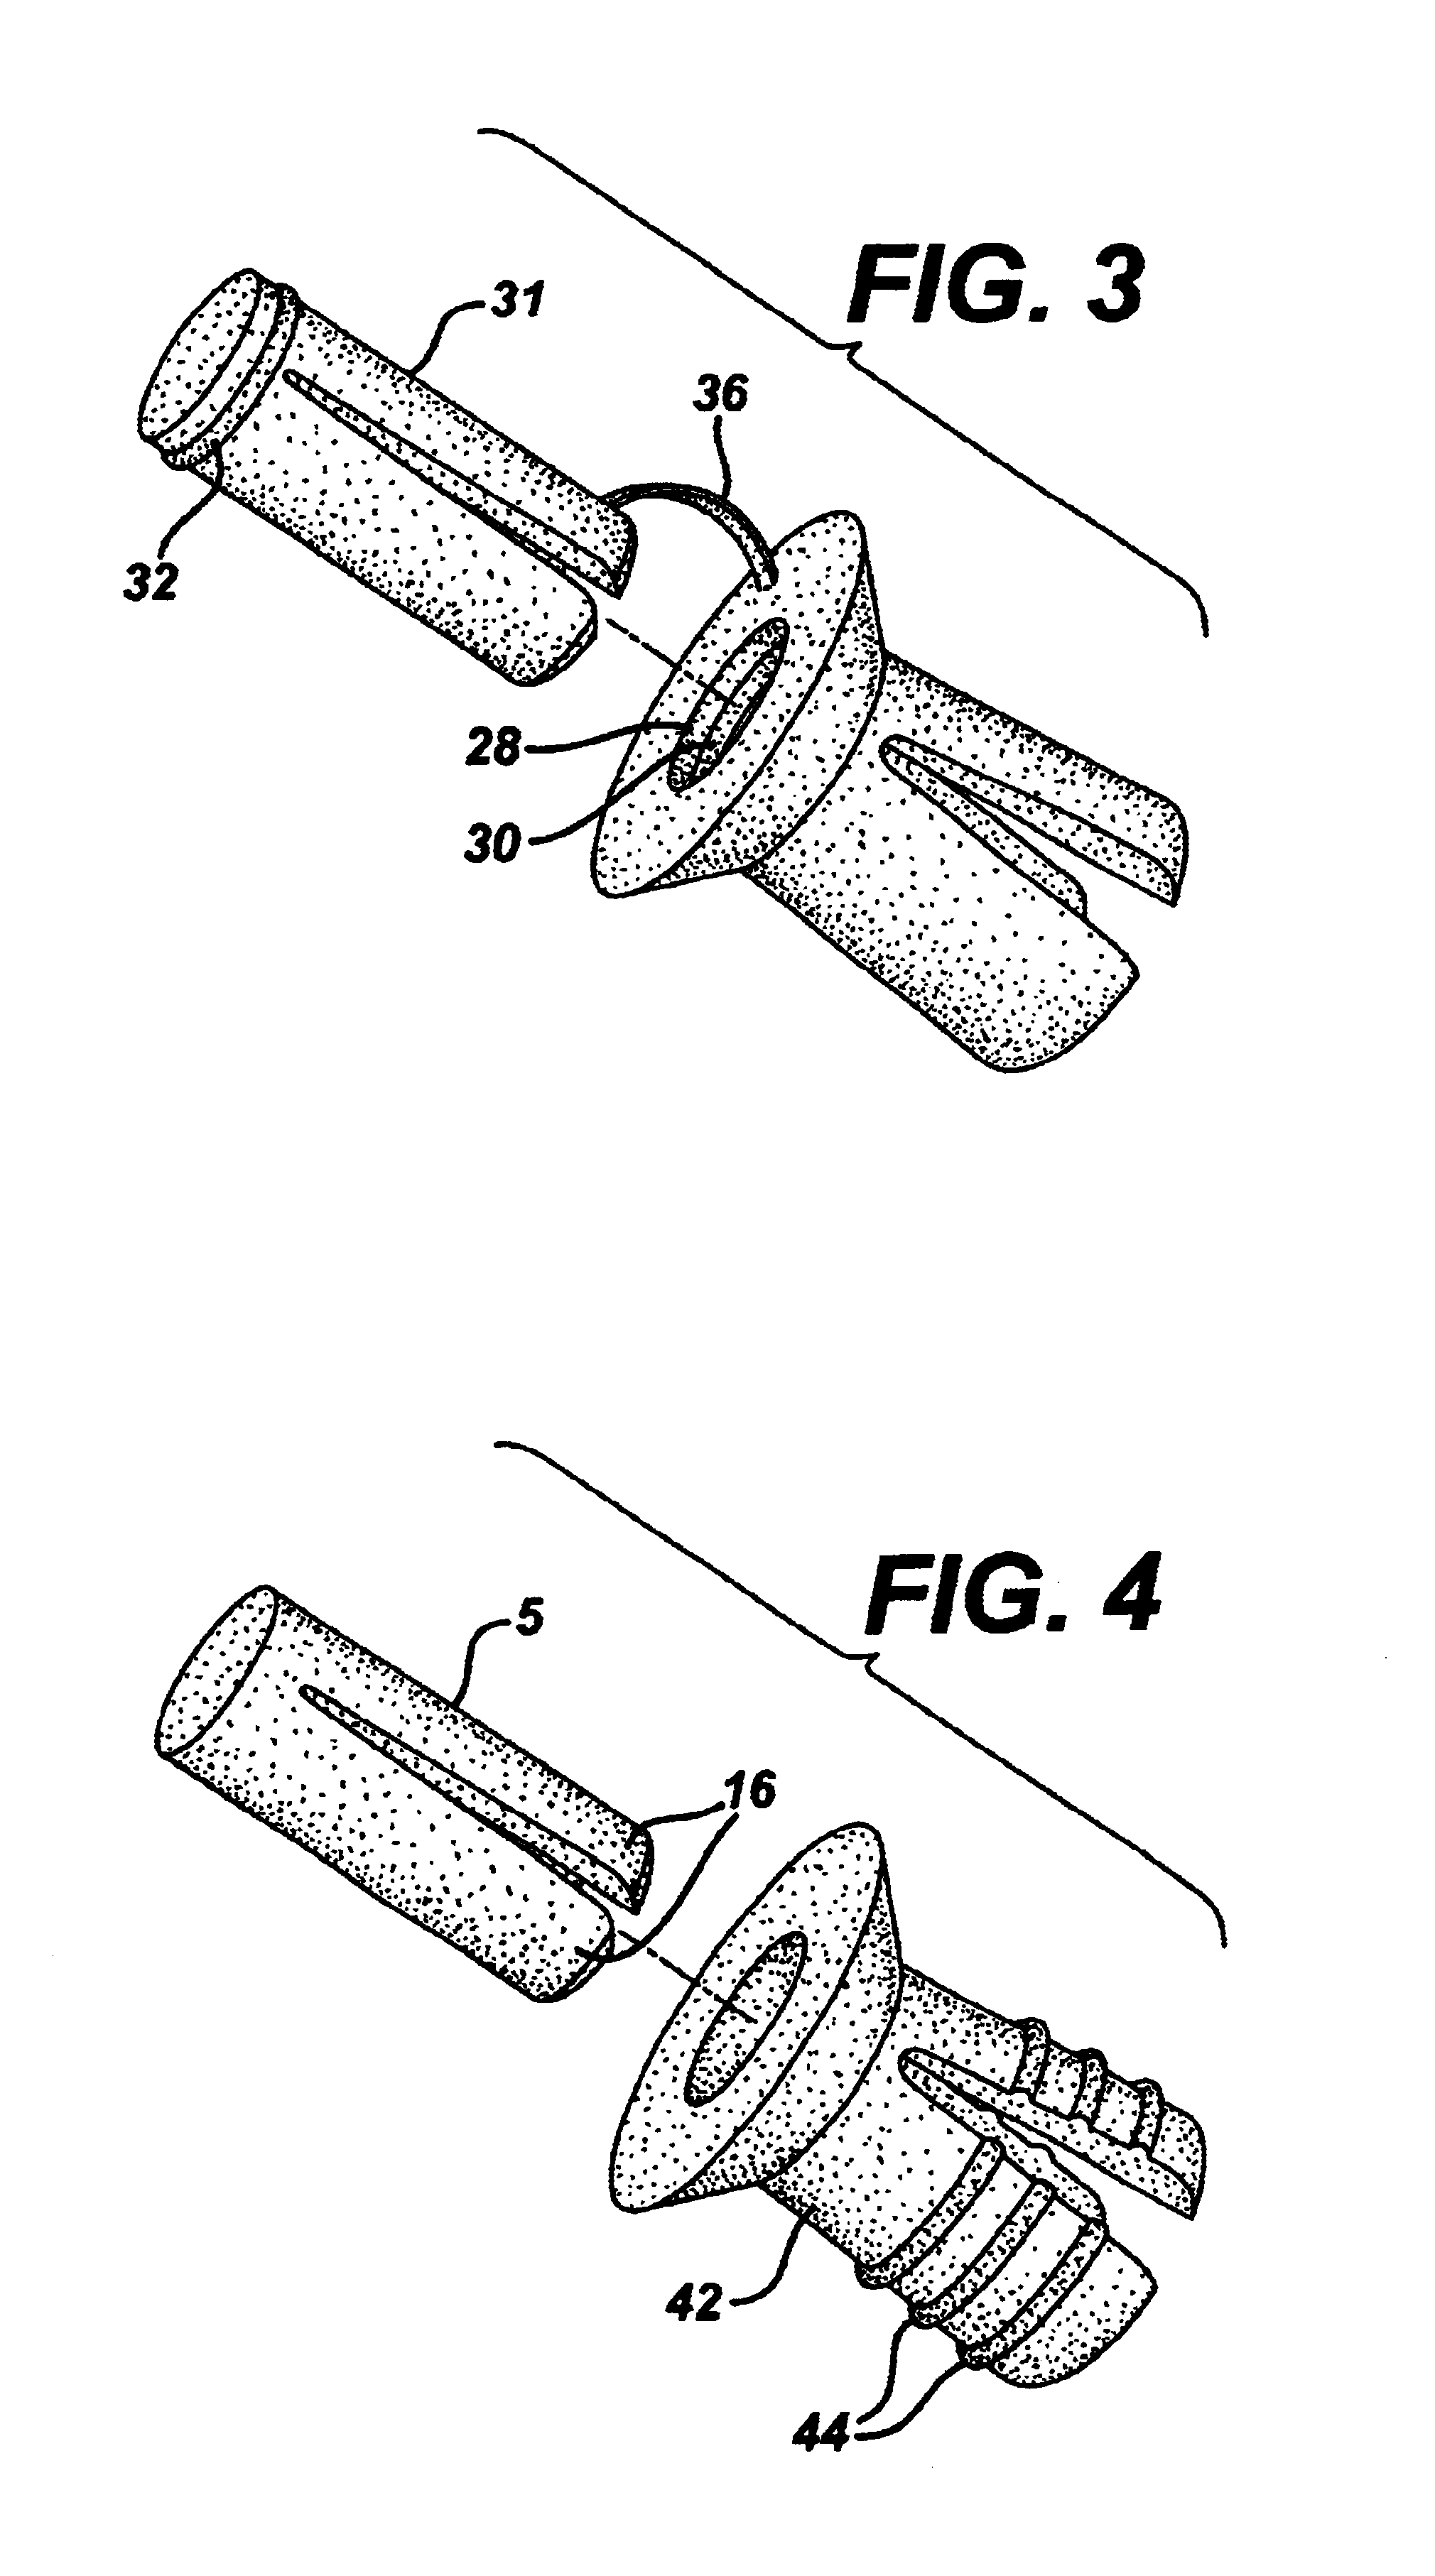 One-piece biocompatible absorbable rivet and pin for use in surgical procedures